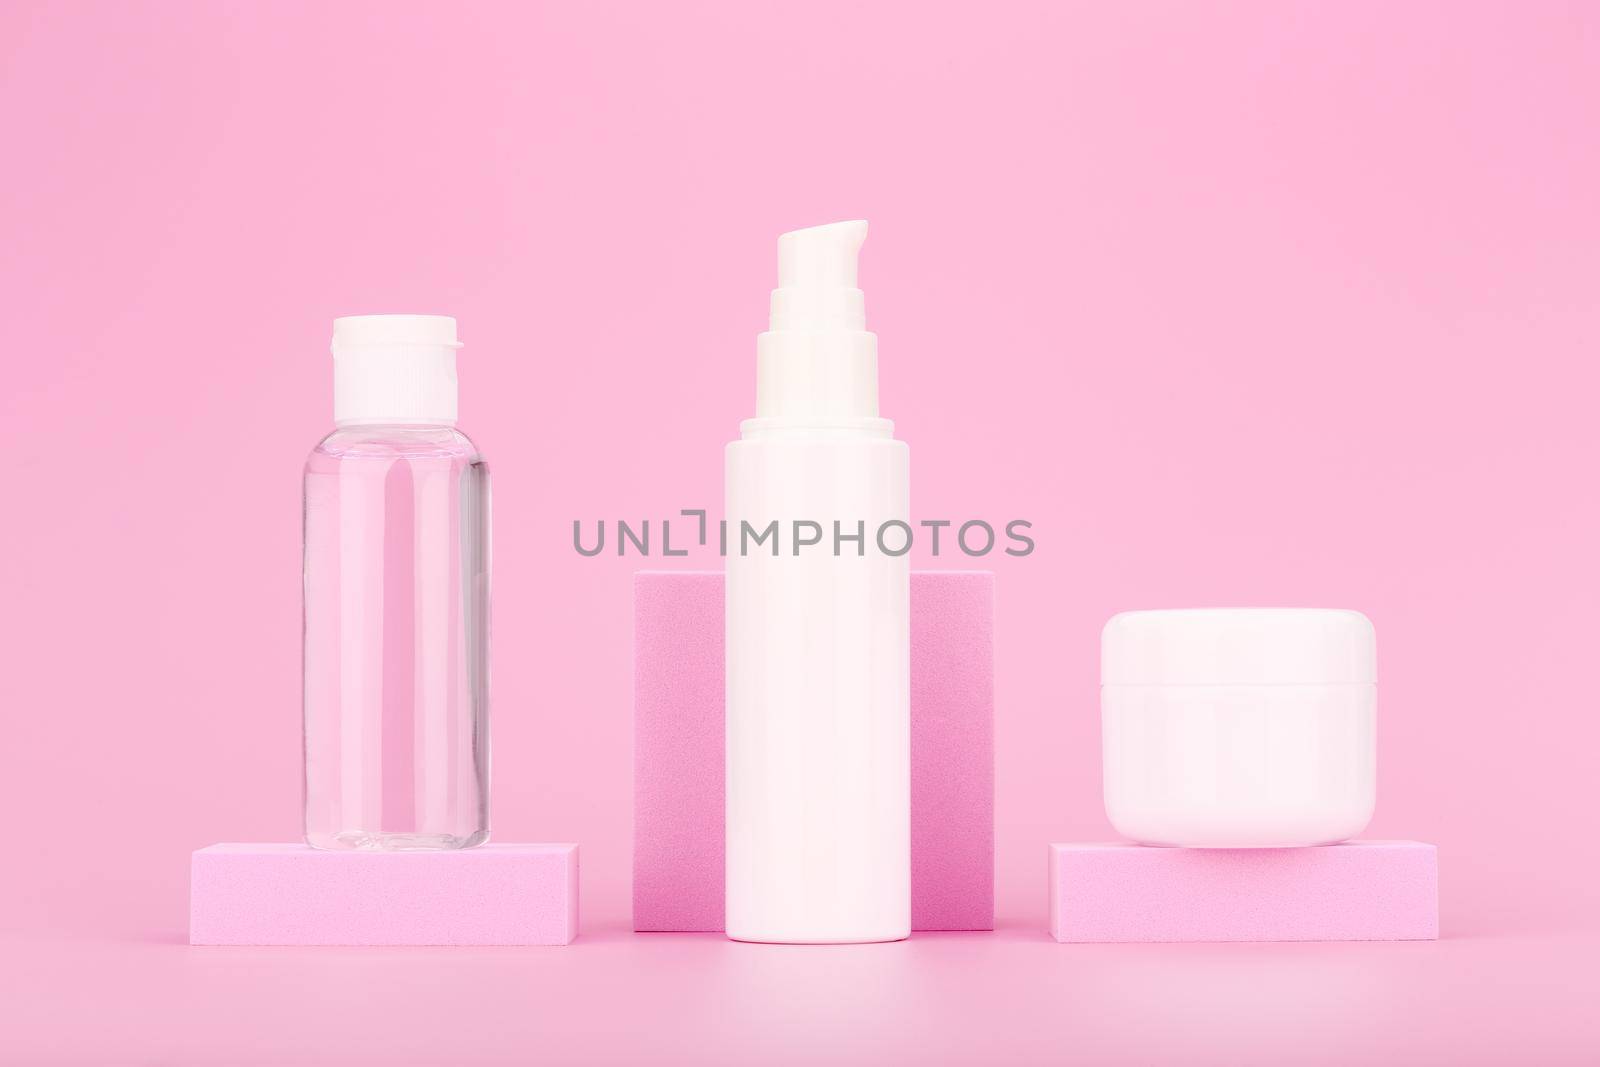 Set of cosmetic bottles on pink podium against pink background. Concept of beauty products and daily skin routine by Senorina_Irina